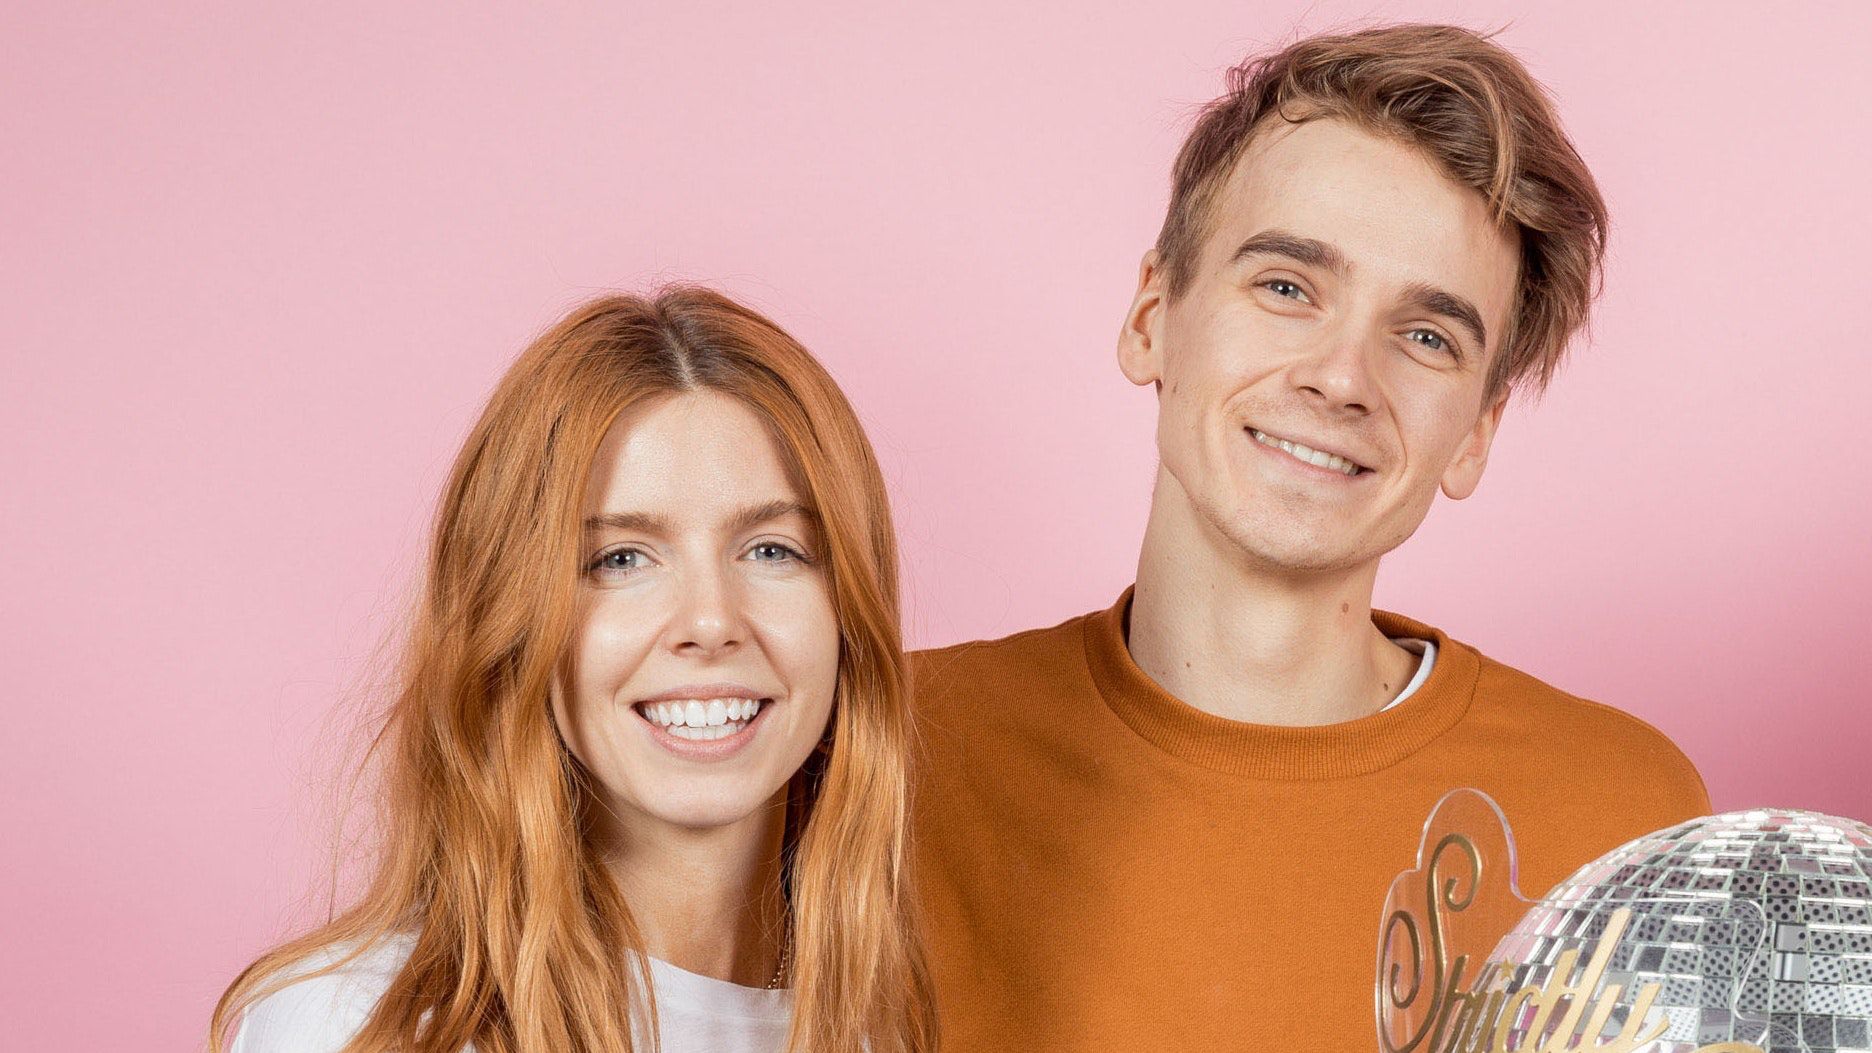 Image of Stacey Dooley and Joe Sugg.